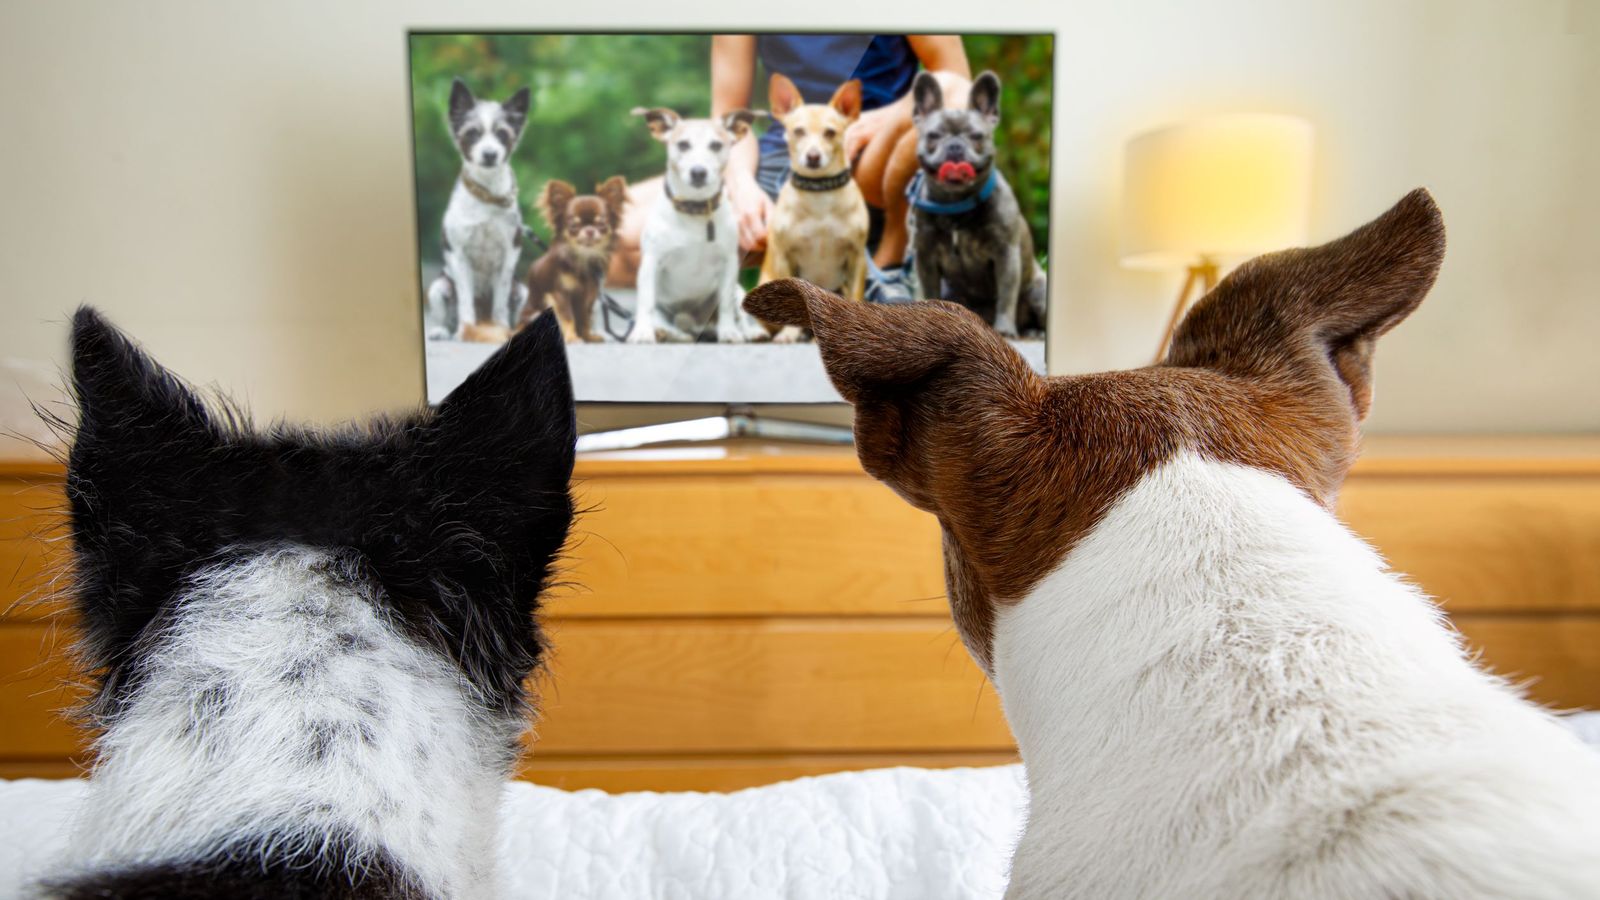 Dogs TV channel: DogTV set to launch to help with stress and behavioural problems